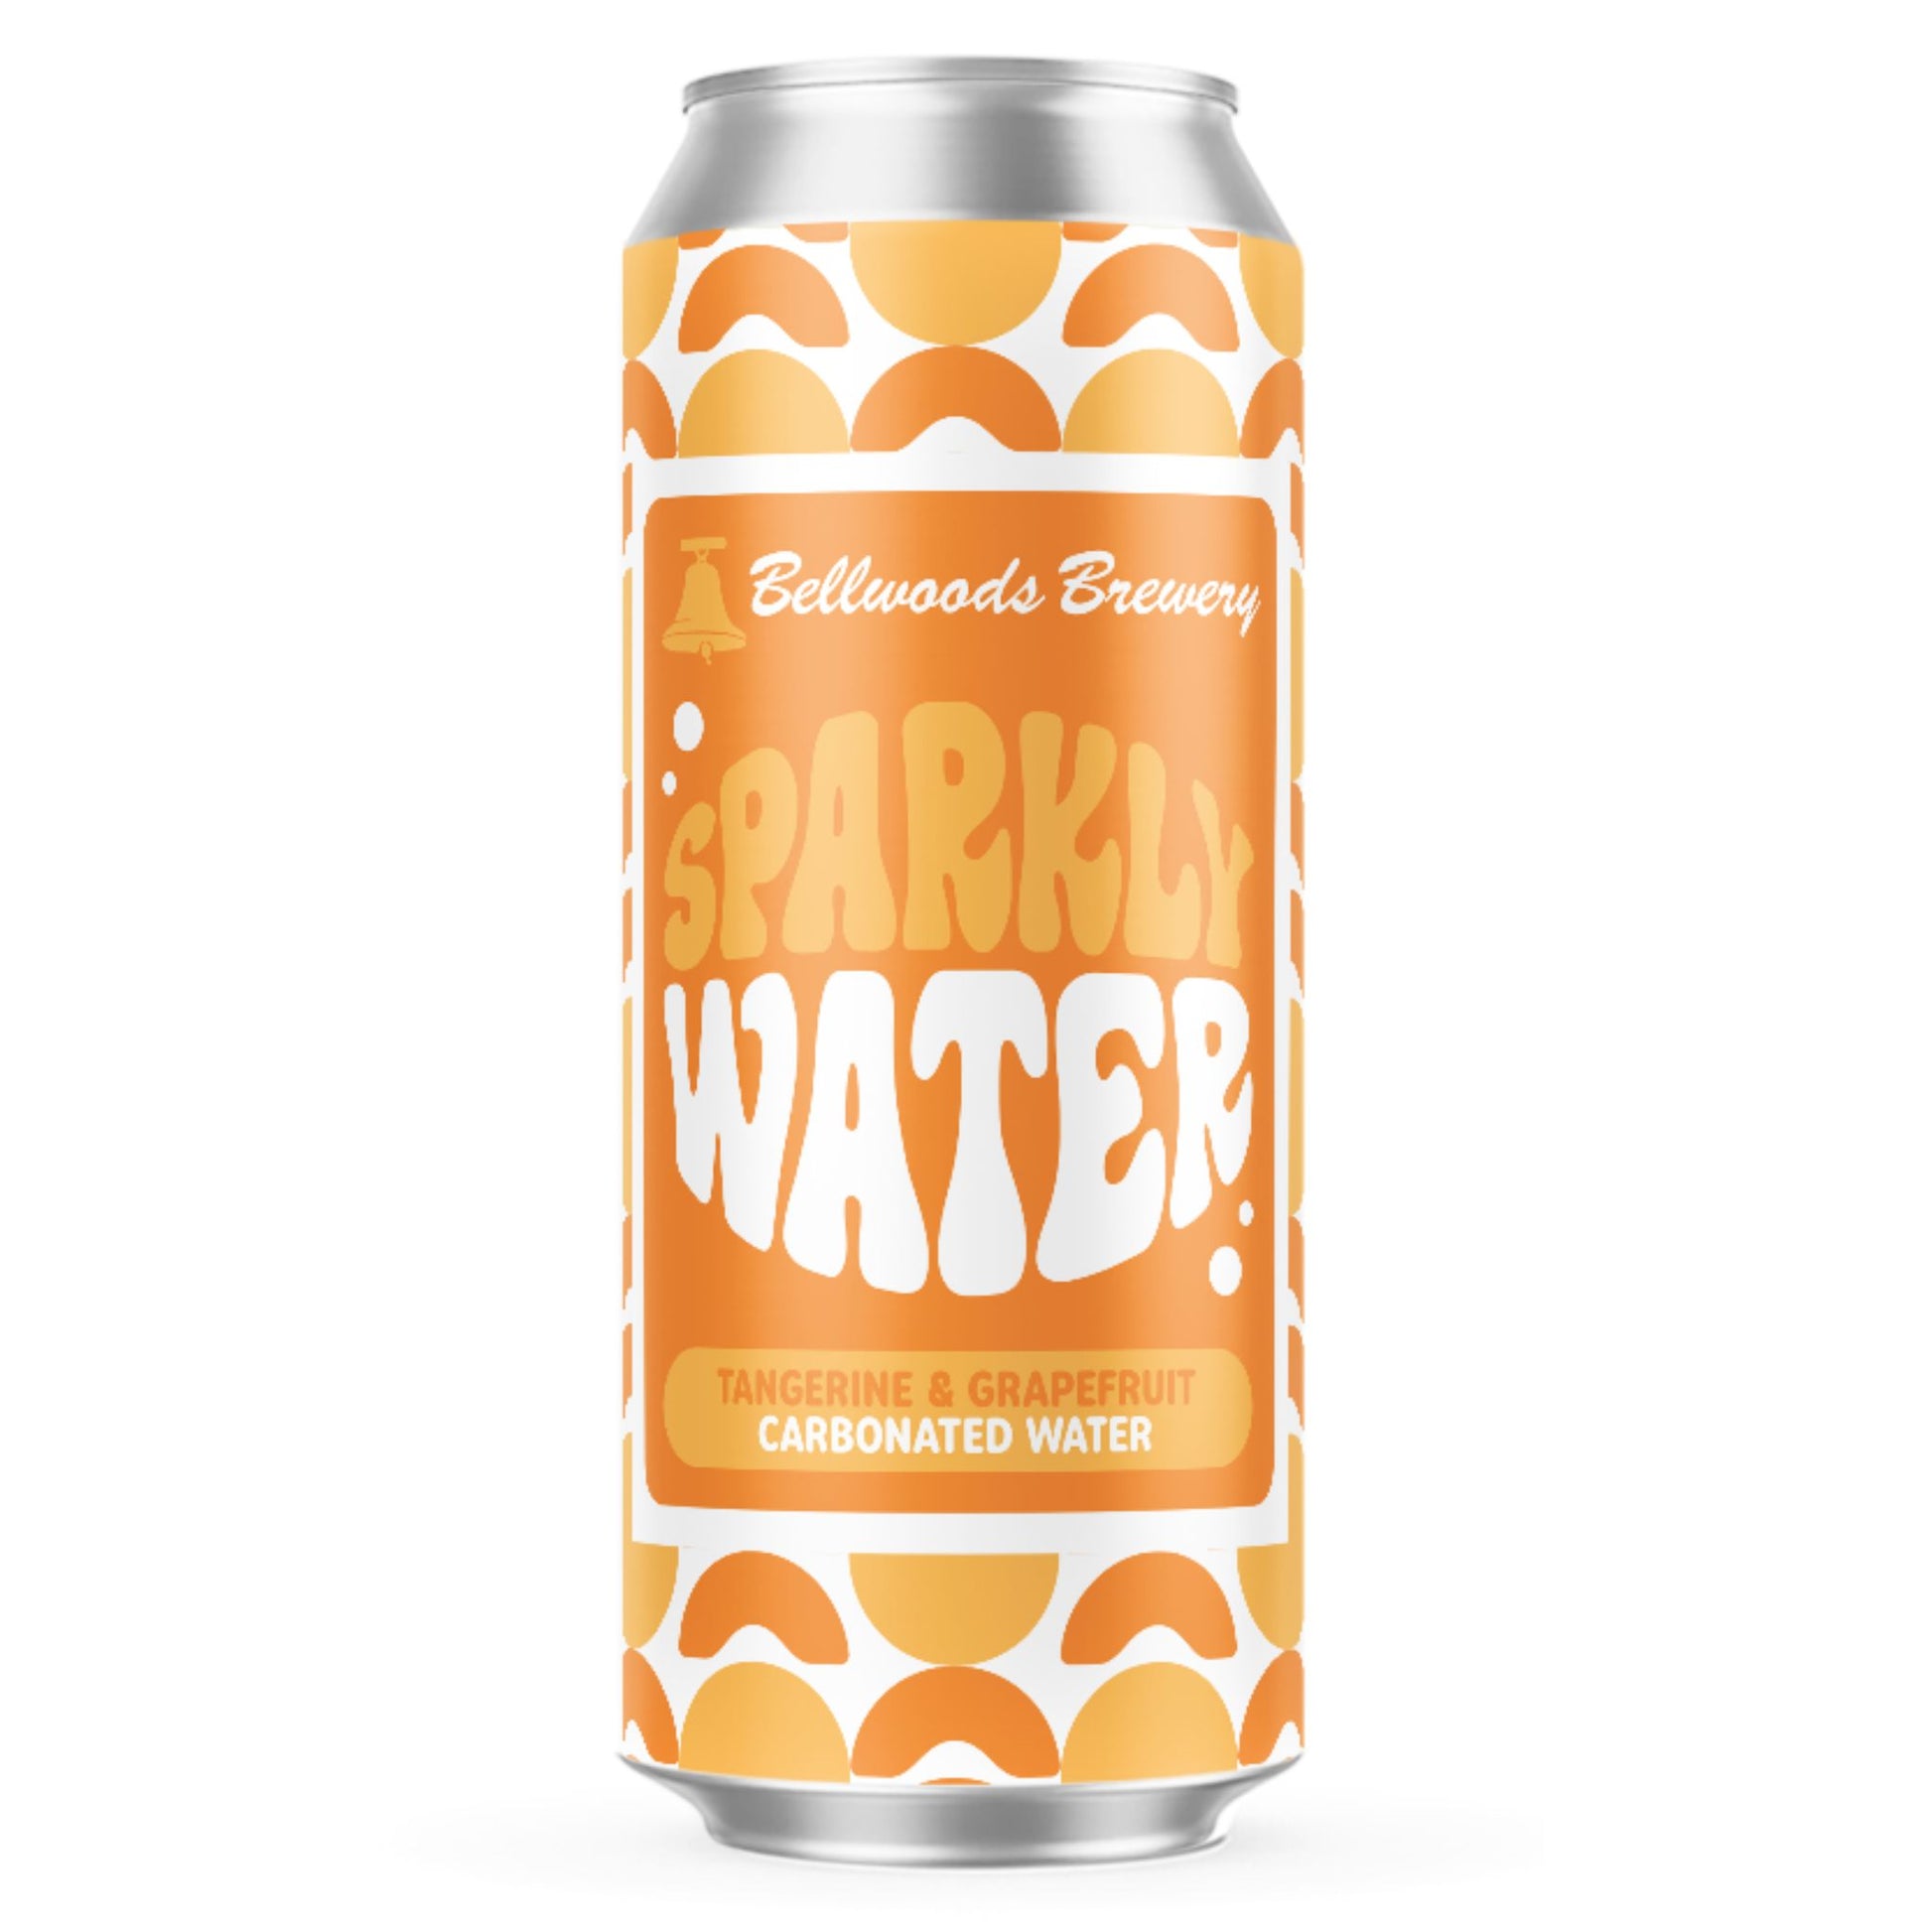 Bellwoods Brewery Sparkling Water, Tangerine and Grapefruit is available at Knyota Non-Alcoholic Drinks.